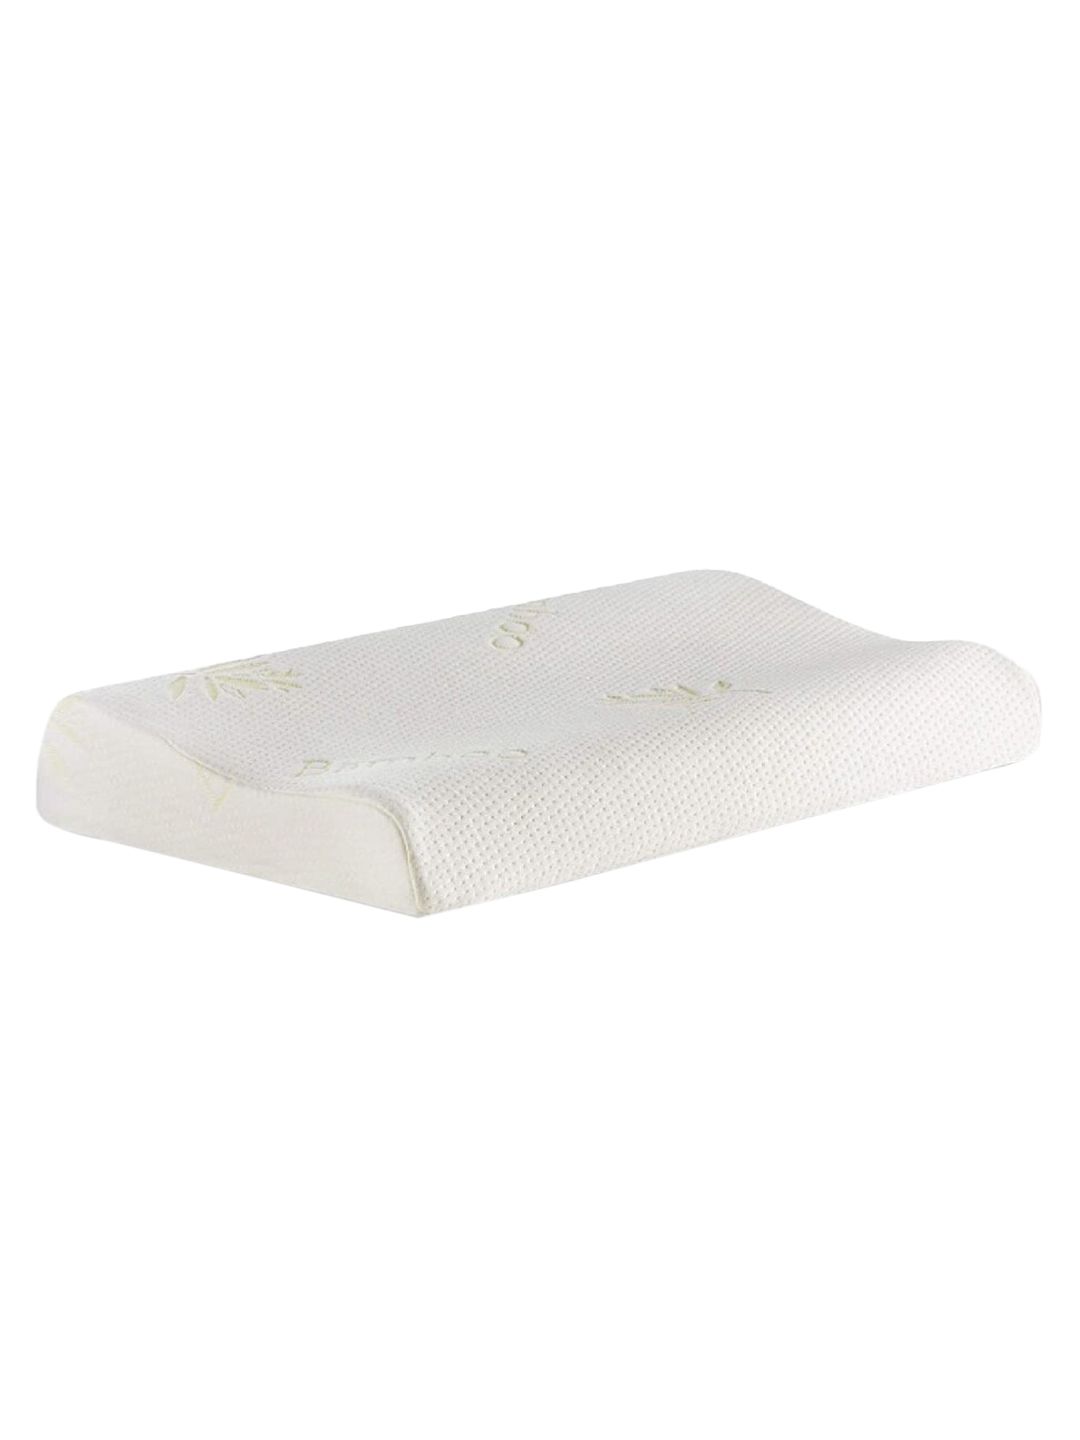 The White Willow Memory Foam Cooling Gel Cervical Bed Pillow Price in India